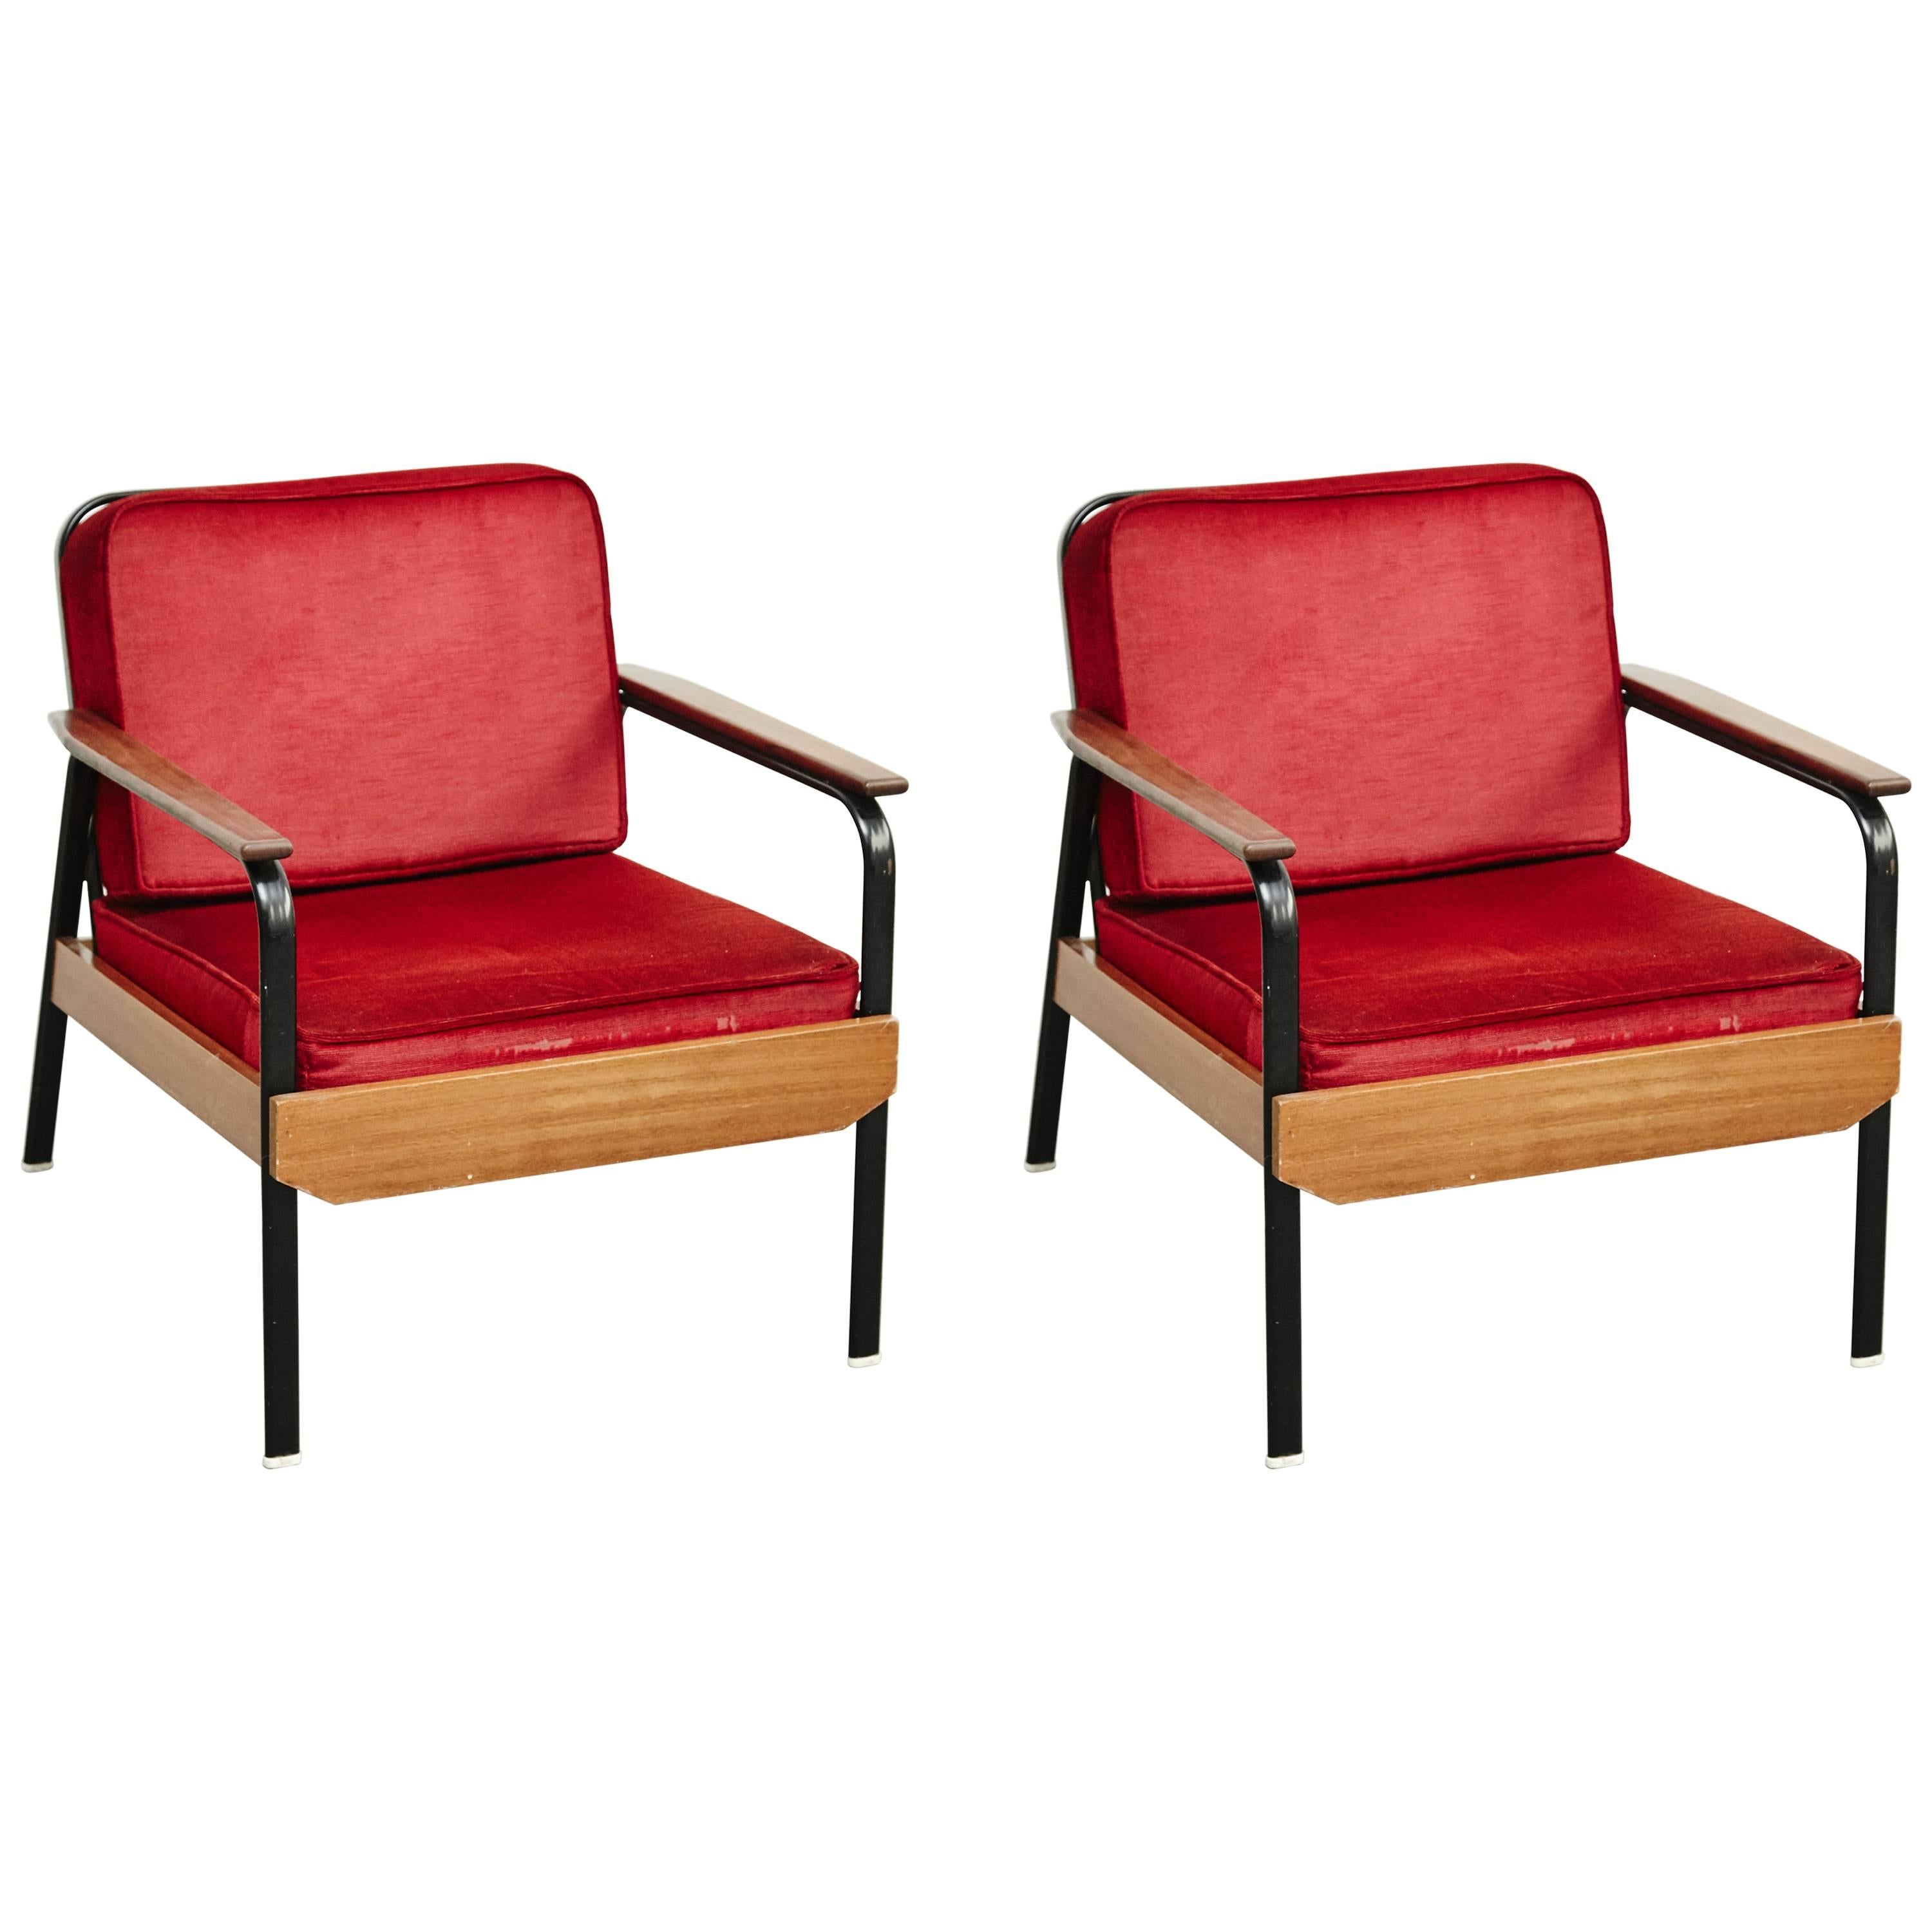 Pair of French Mid Century Modern Wood and Metal Easy Chairs after Jean Prouve